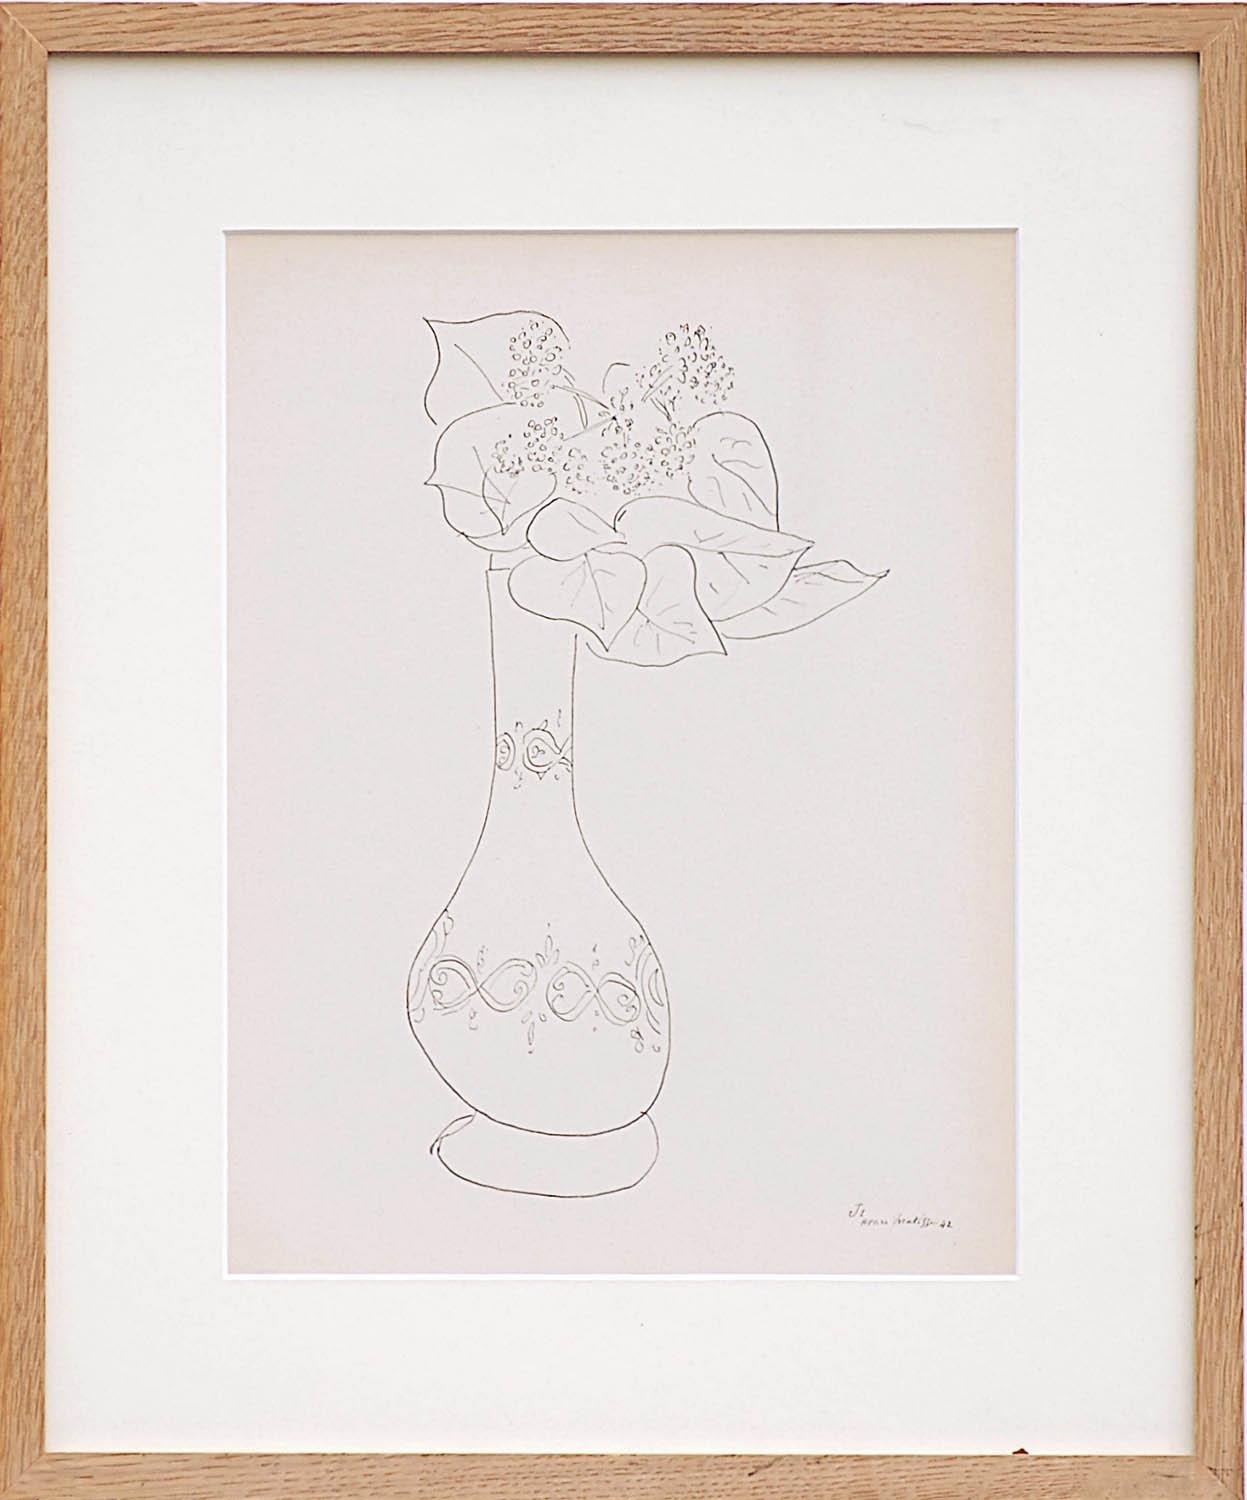 Vase with Flowers - J1 by Henri Matisse